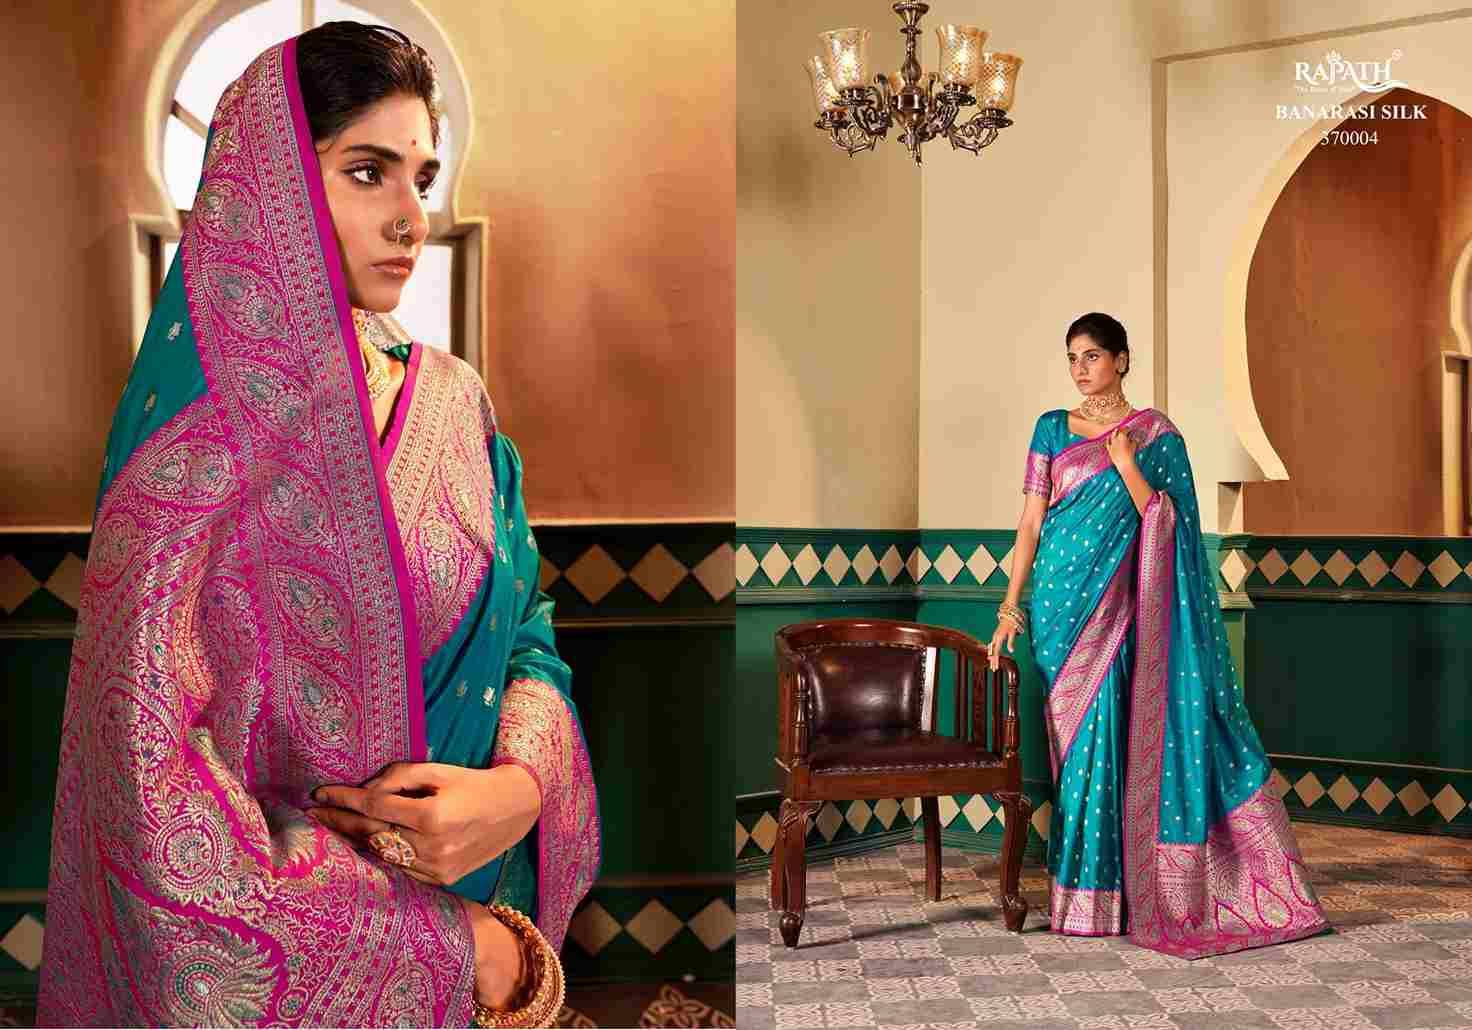 Pranaya By Rajpath 37001 To 37008 Series Indian Traditional Wear Collection Beautiful Stylish Fancy Colorful Party Wear & Occasional Wear Banarasi Silk Sarees At Wholesale Price